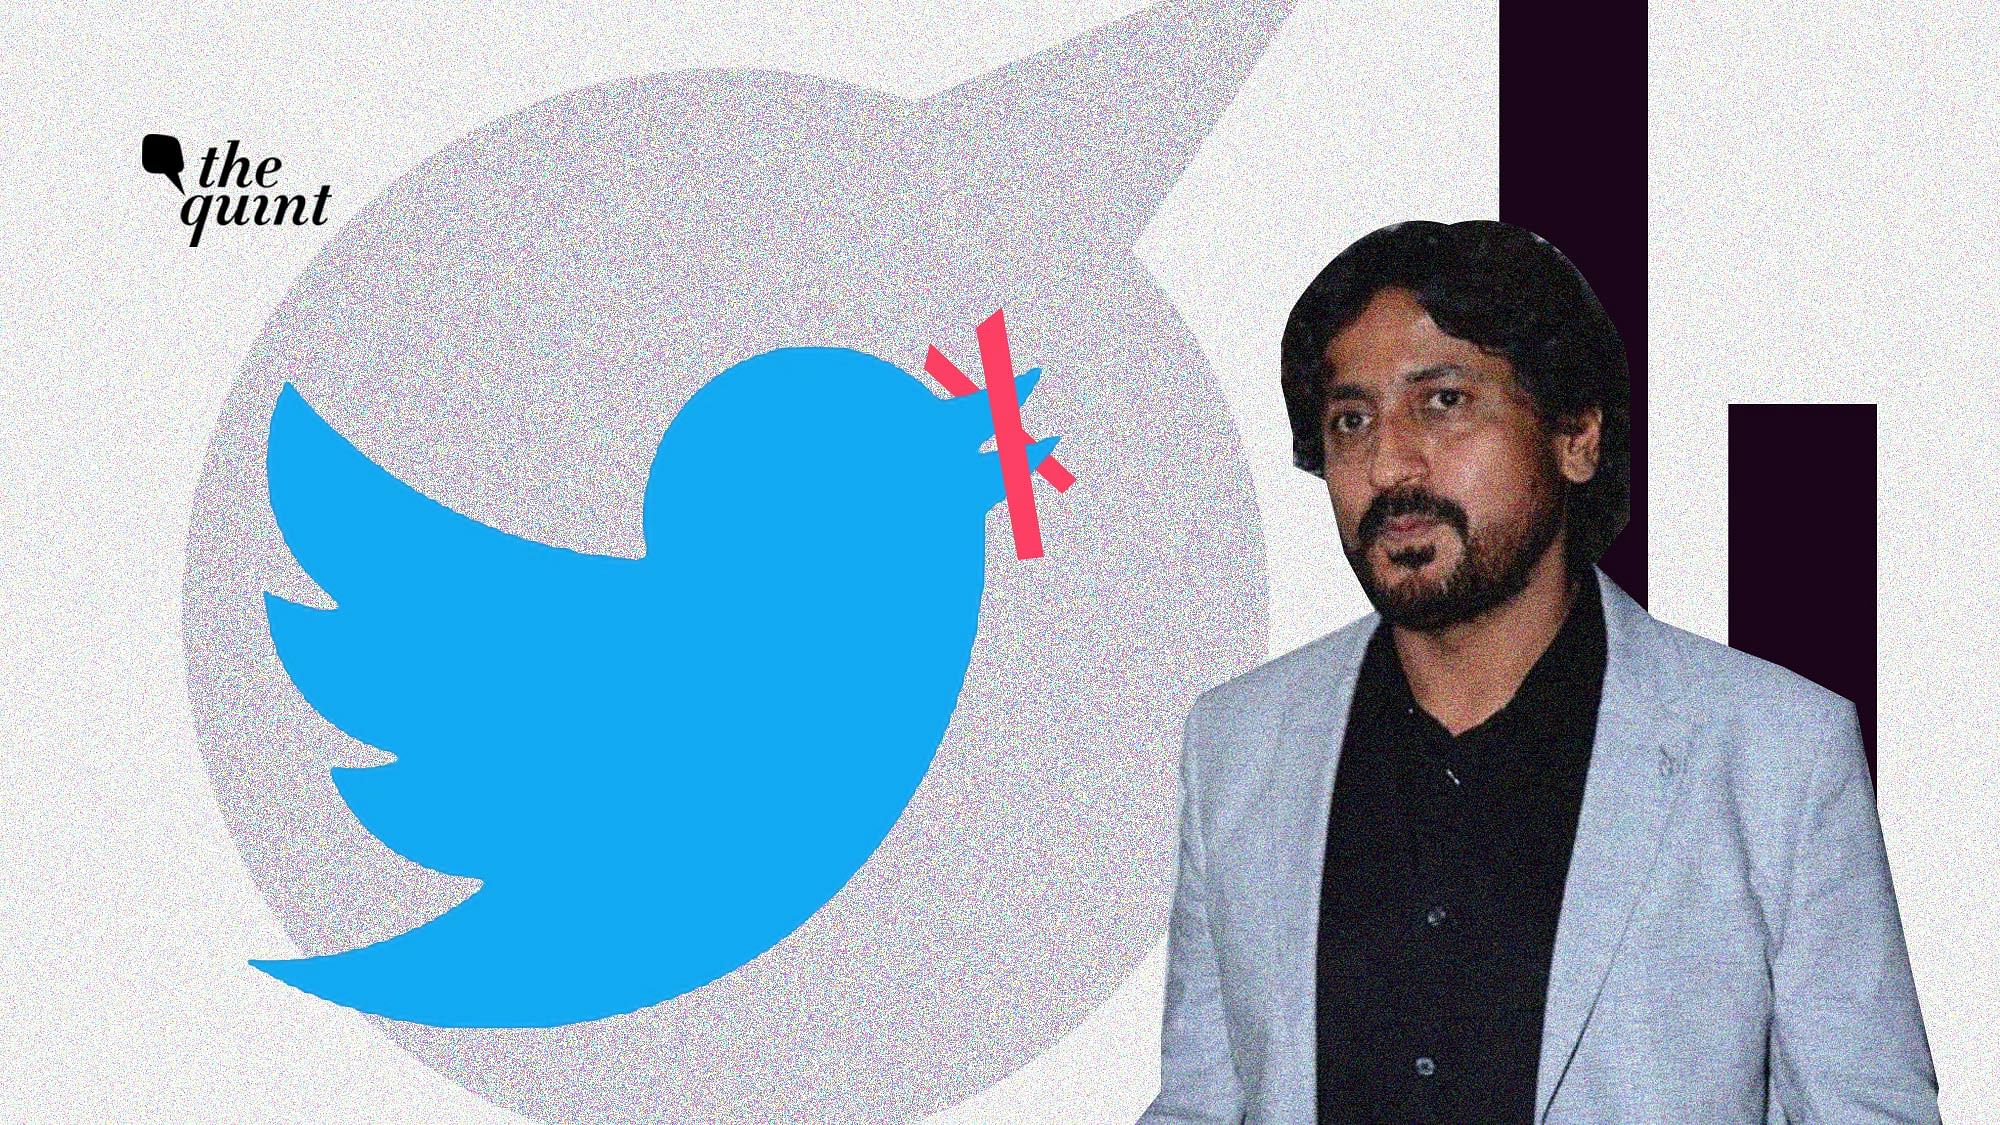 Filmmaker Kapri’s tweet, which was critical of the PM, was restricted by Twitter after being flagged by MeITY.&nbsp;